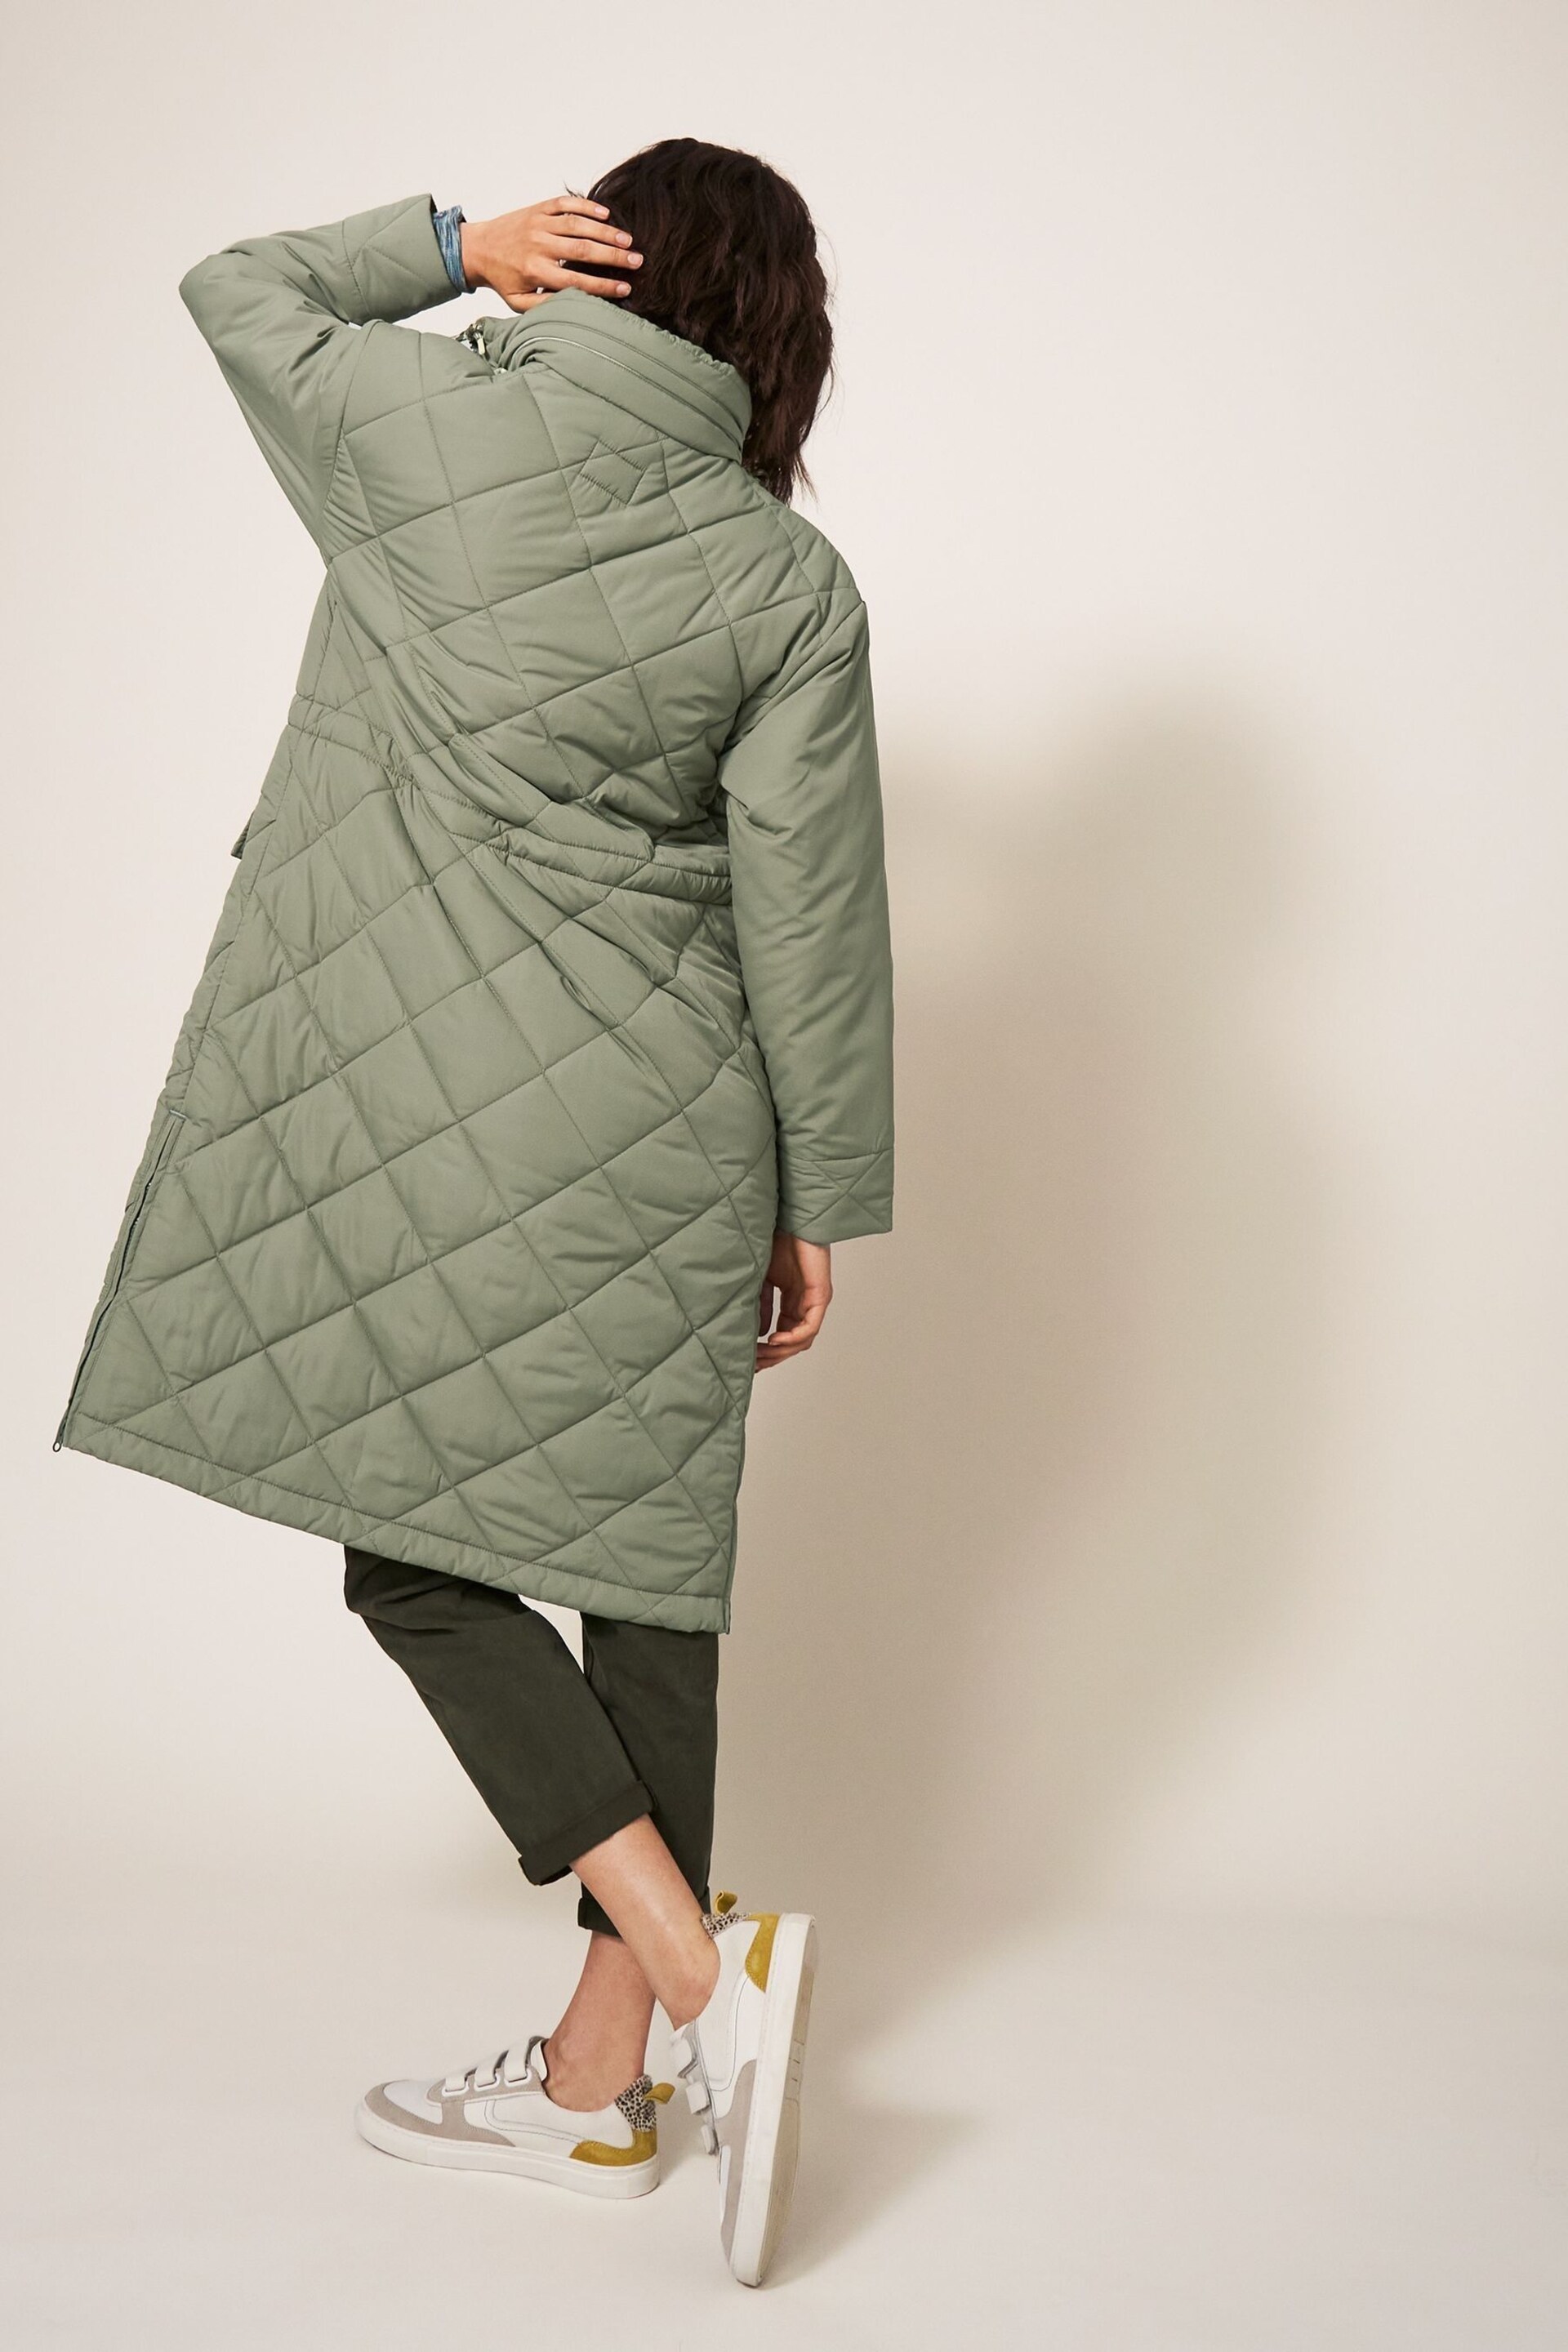 White Stuff Green Lorena Quilted Coat - Image 2 of 6